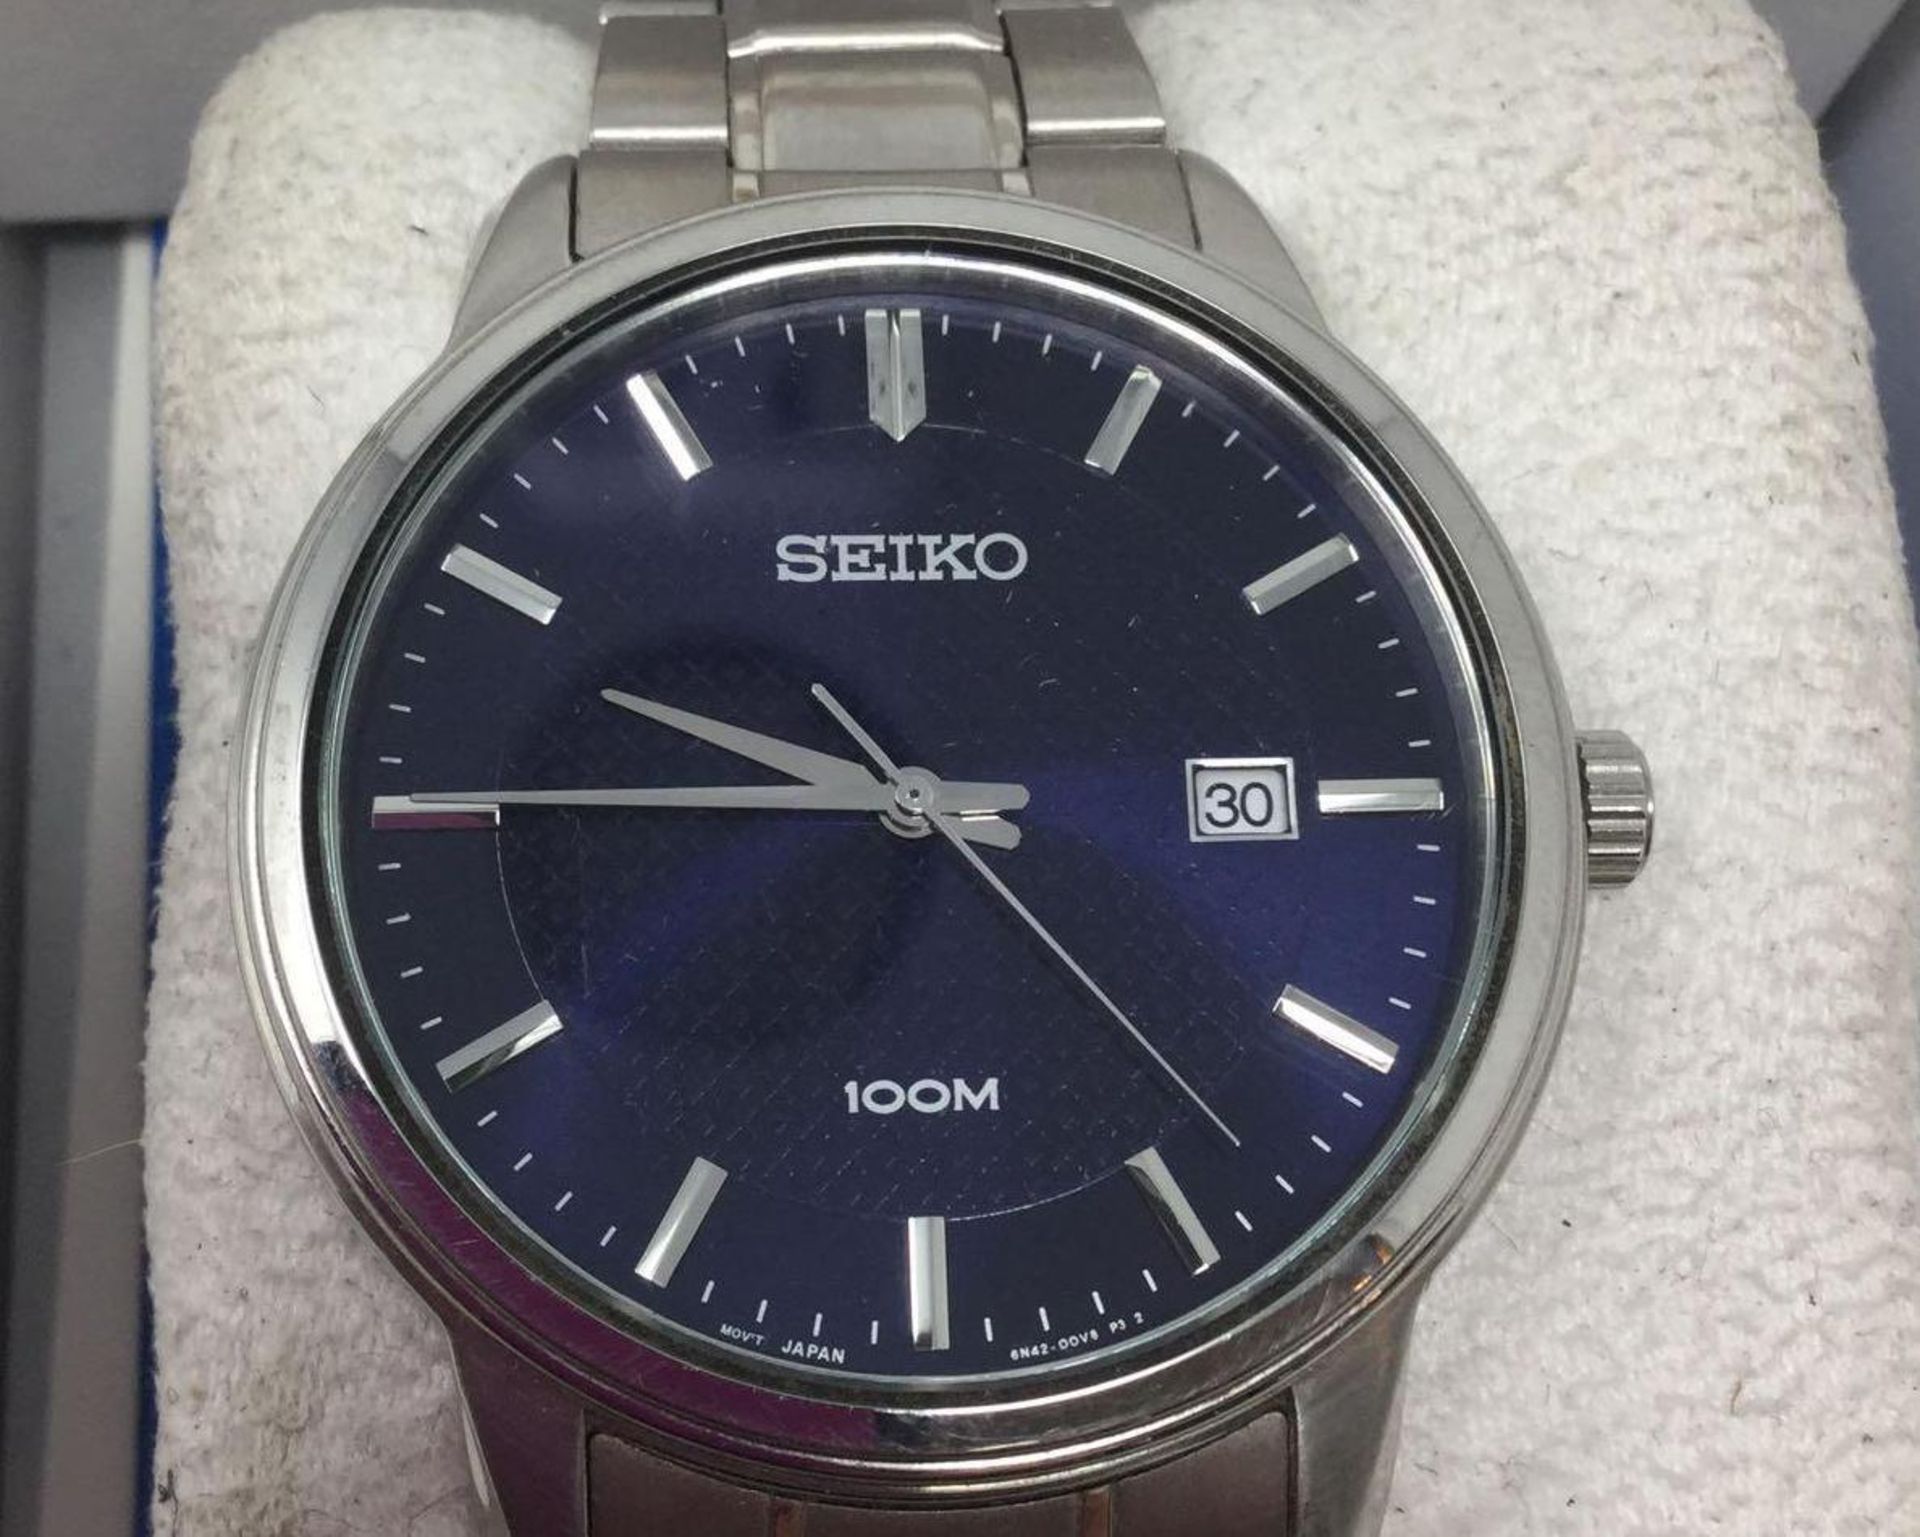 Seiko Watch - Silver Band and Blue Face - Image 2 of 2